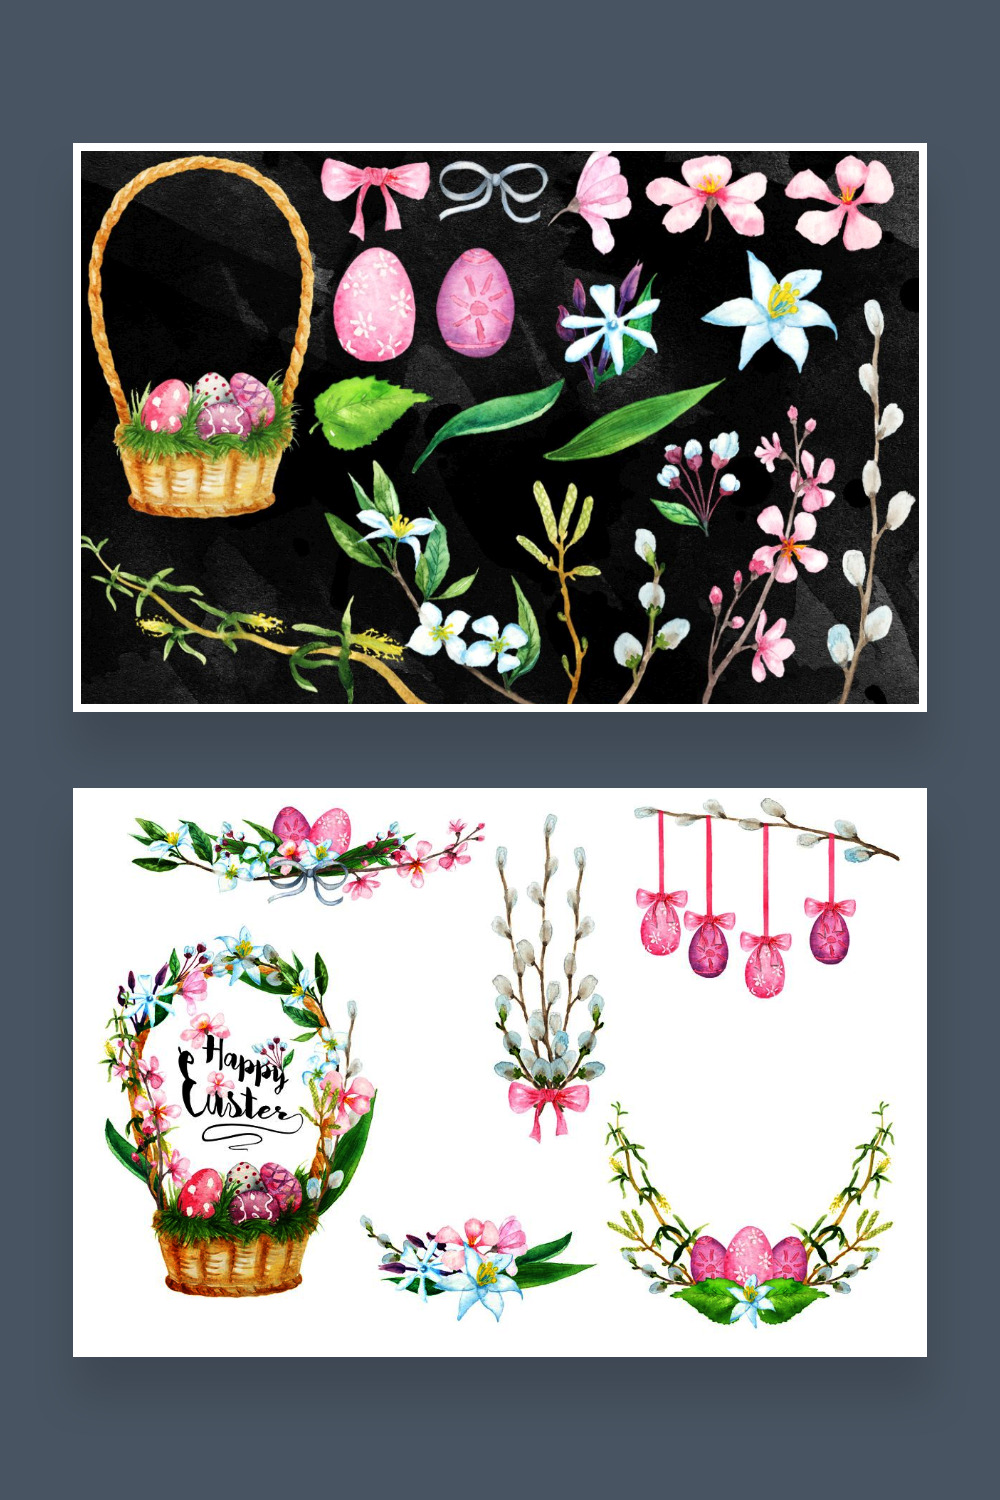 Collage with Easter basket, eggs, flowers on white and black background.